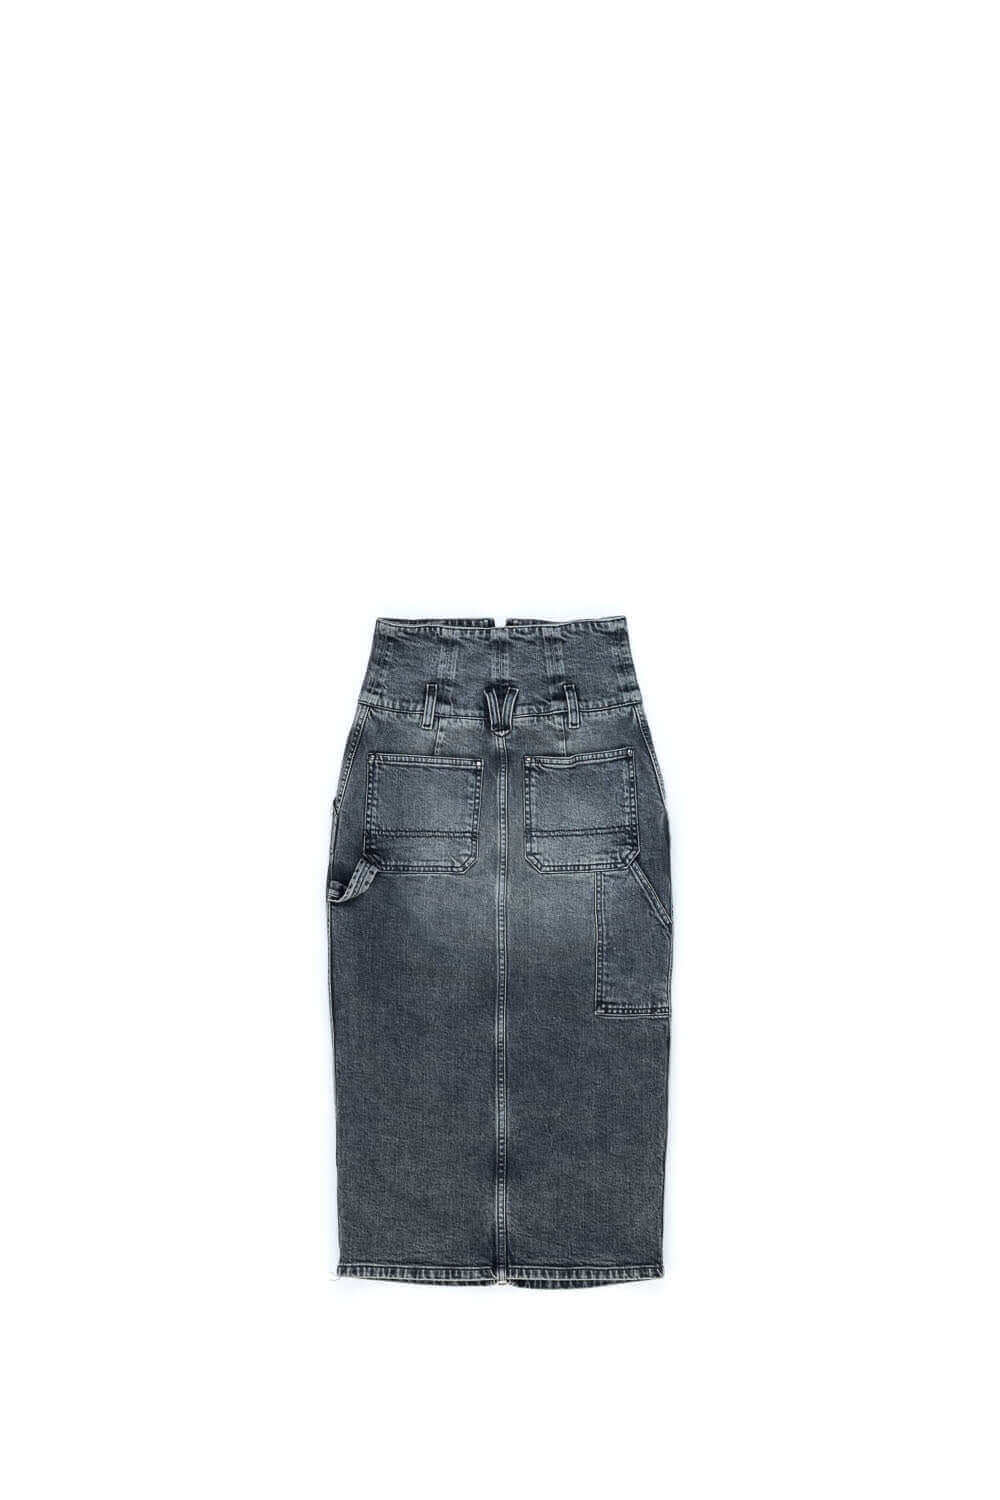 CARGO LONGUETTE SKIRT Denim longuette skirt with front zip closure. Front and back pockets. High waist. Composition: 100% Cotton HTC LOS ANGELES